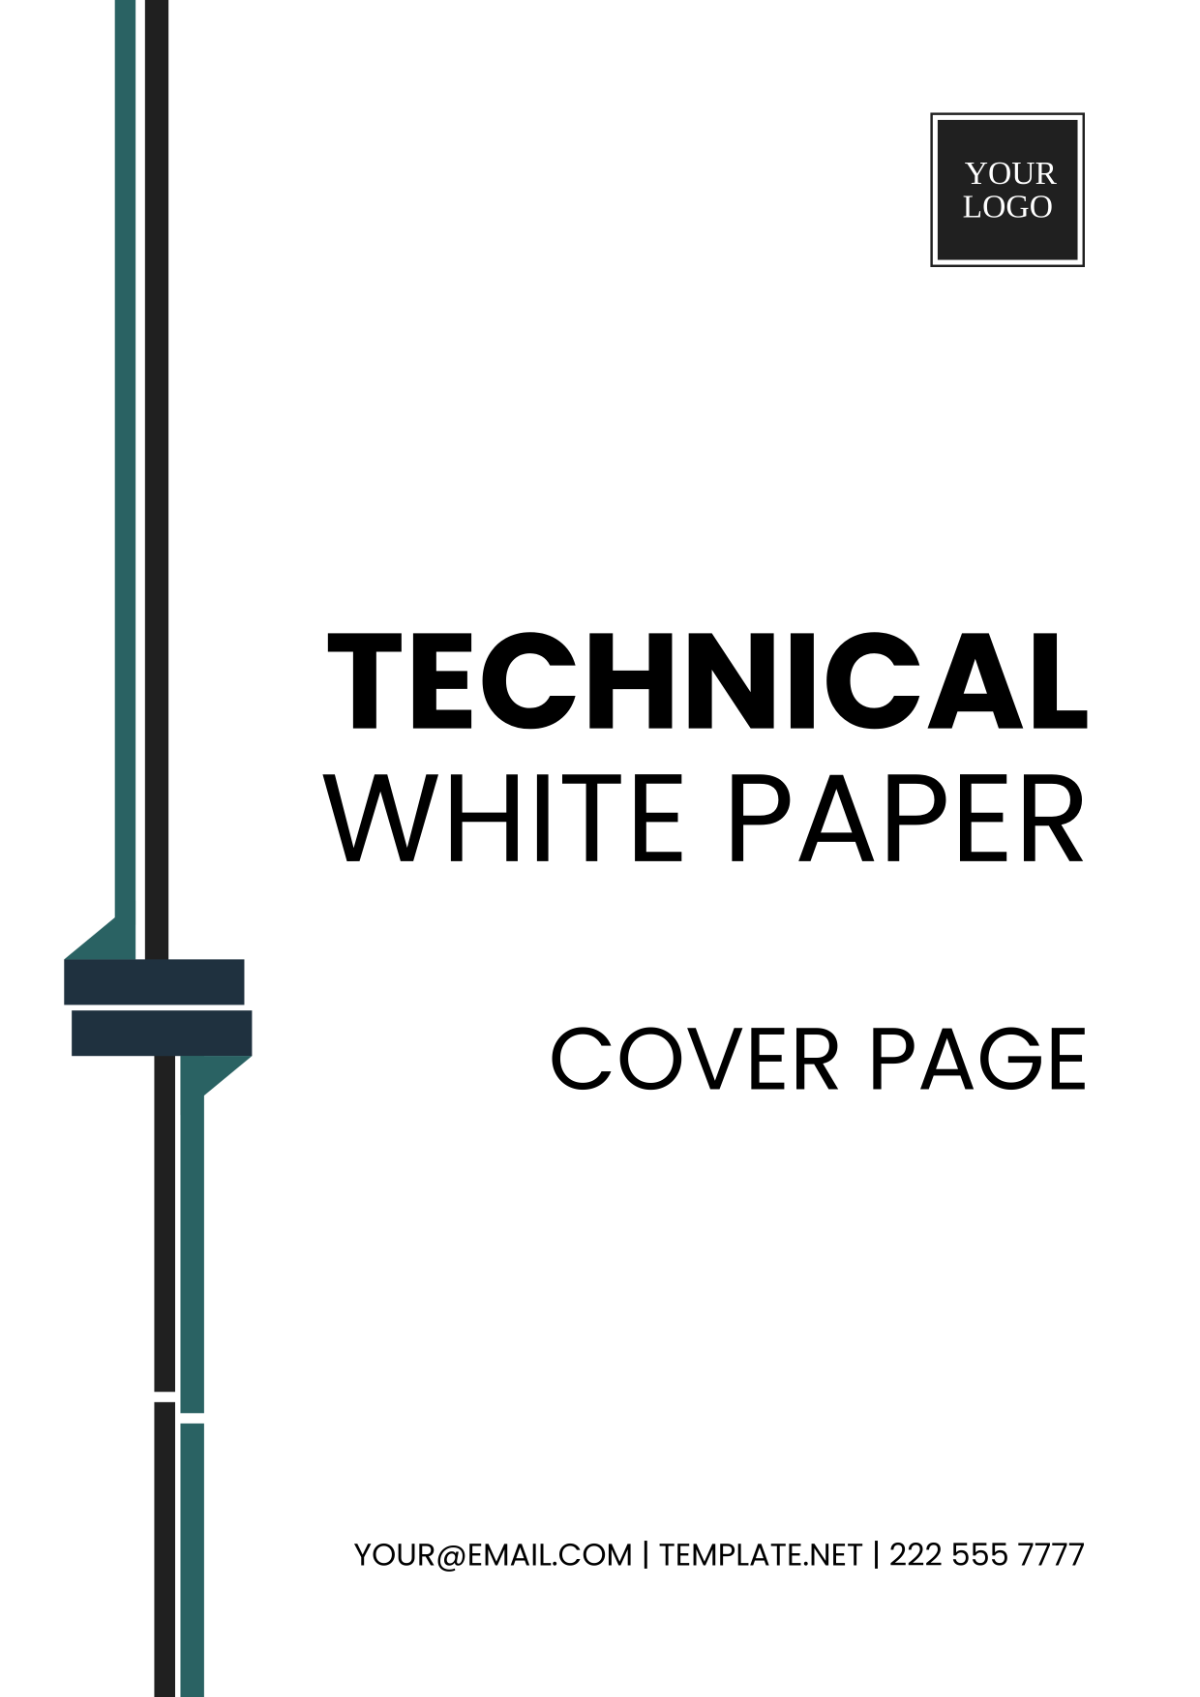 Technical White Paper Cover Page